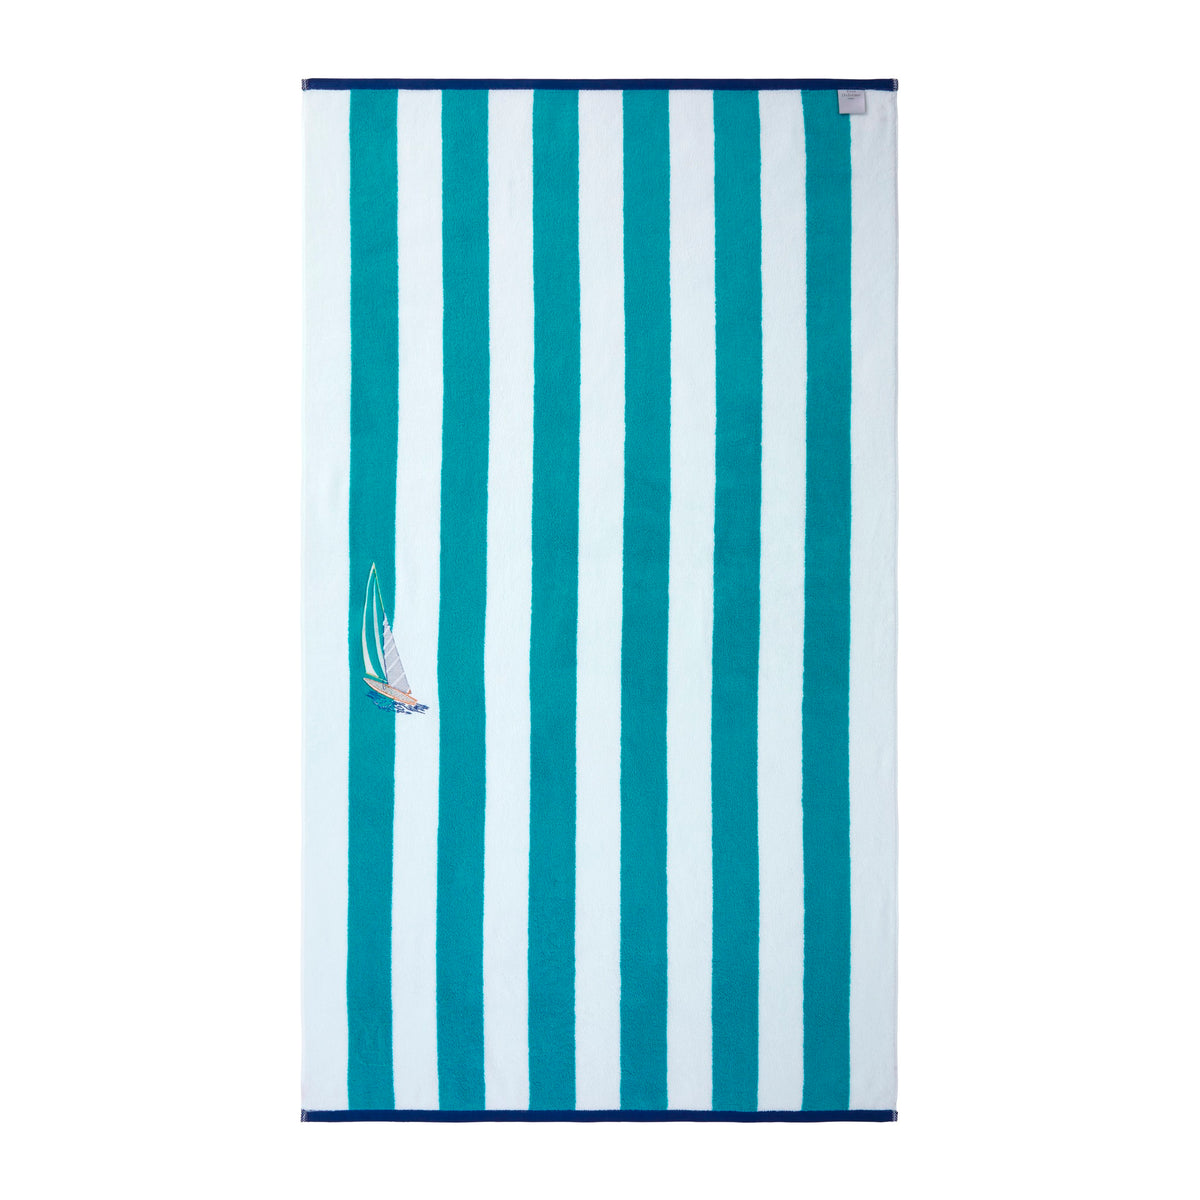 Back View of Yves Delorme Sailing Beach Towel